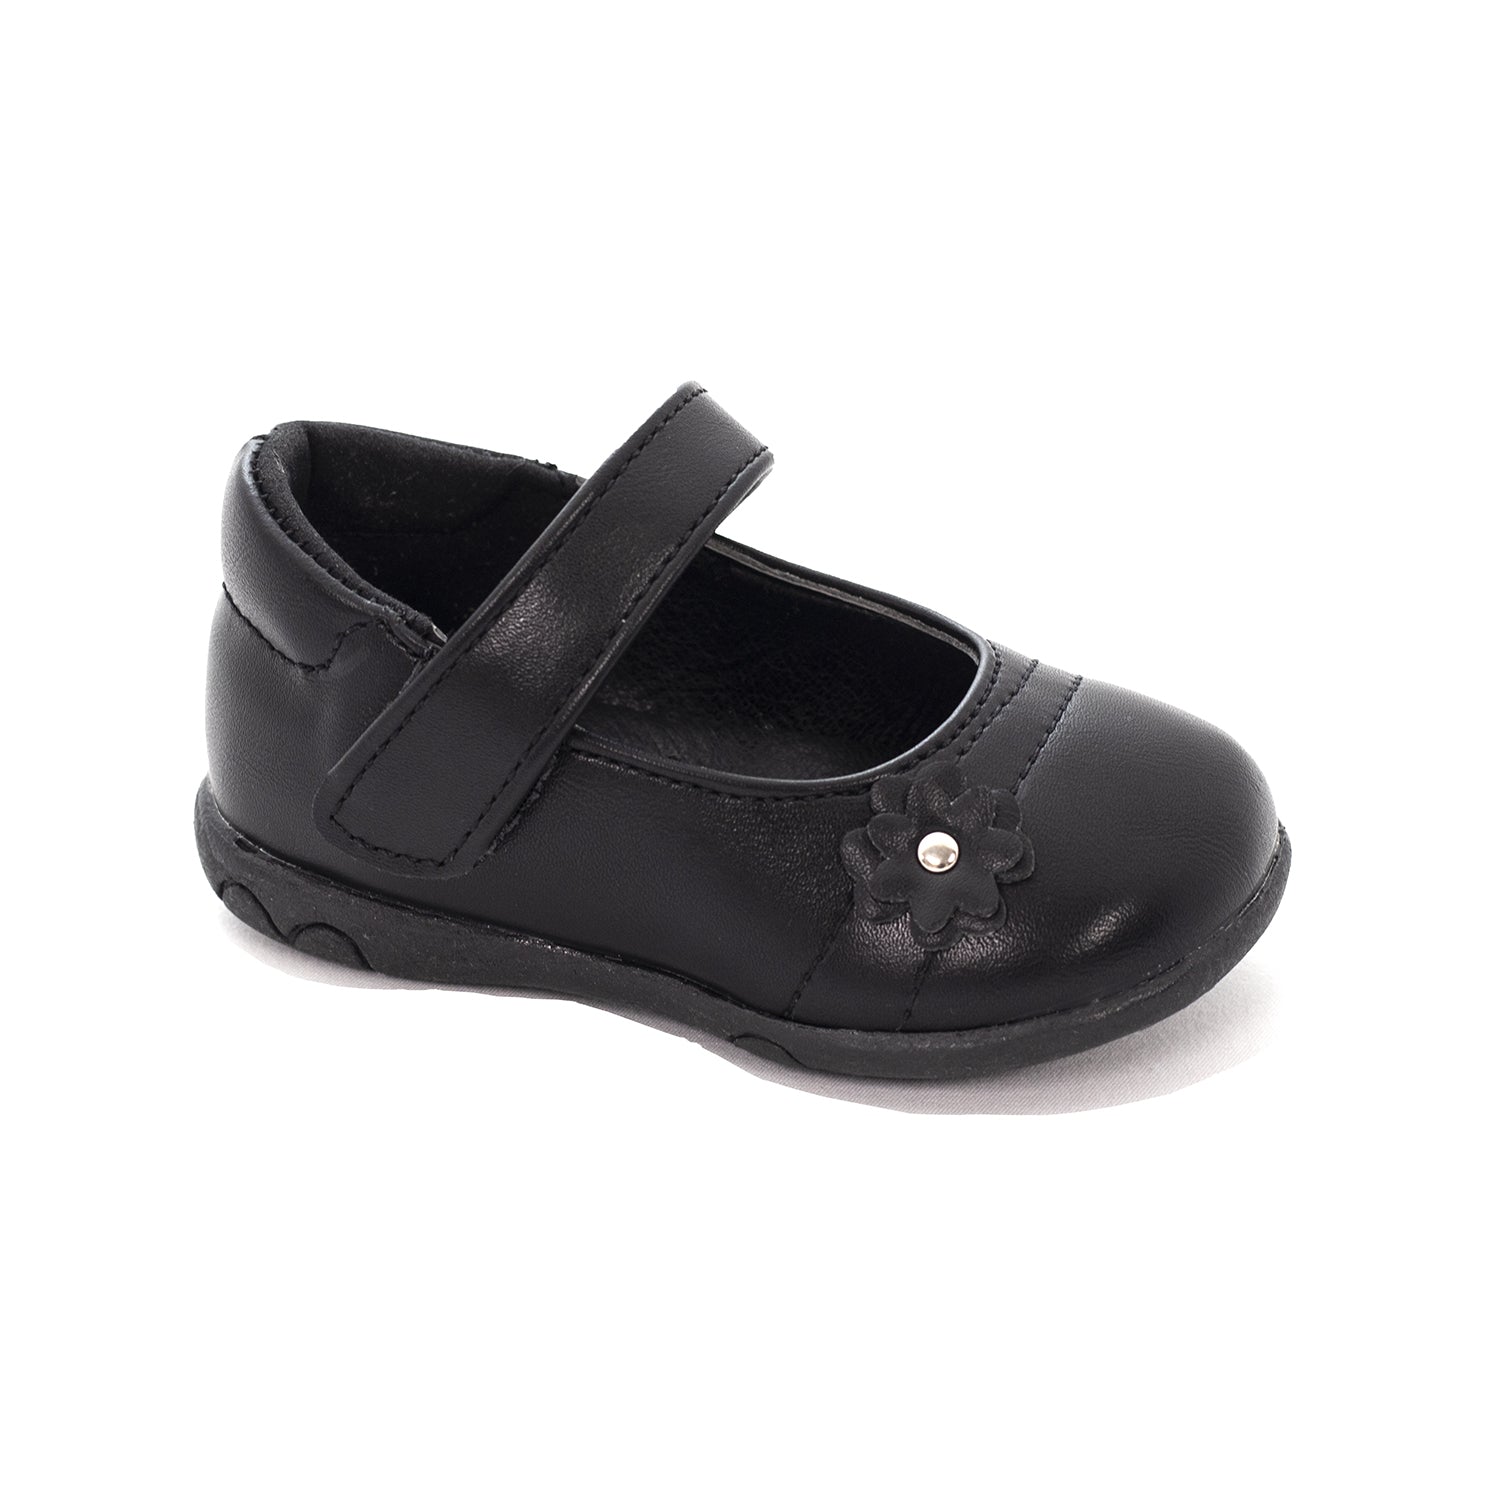 Wholesale GENUINE LEATHER loafer school shoes child boy kids other shoes  designers black kid shoes for children From m.